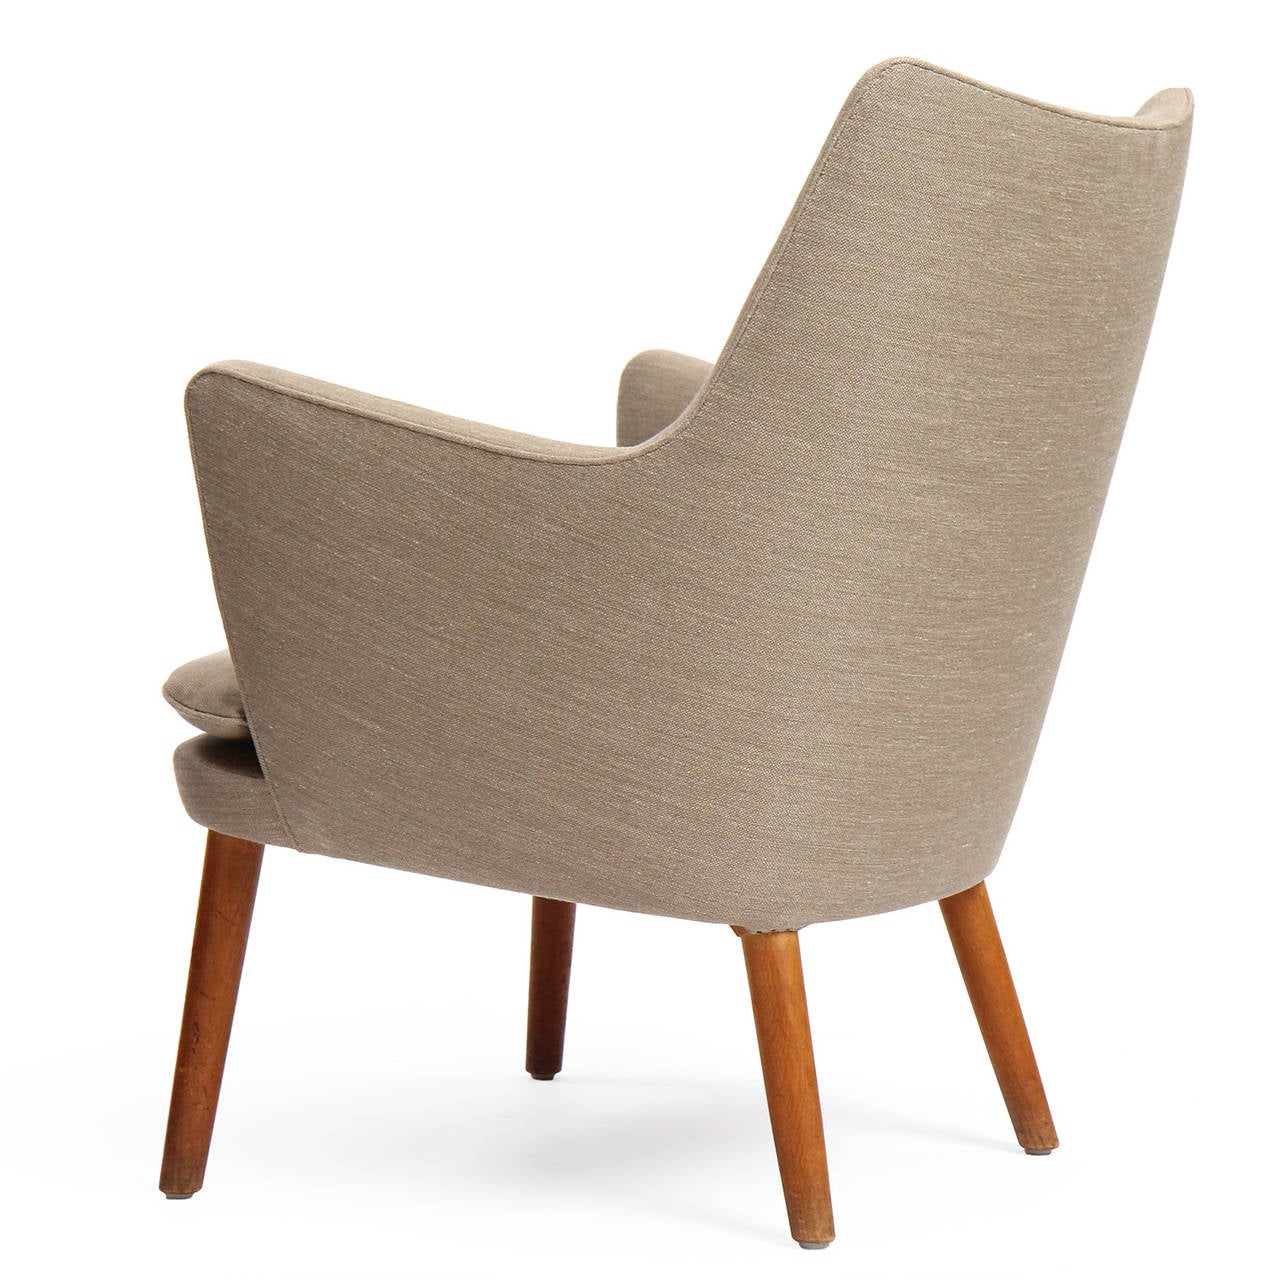 An elegant and sculptural lounge arm chair having a tight upholstered back and loose seat cushion that sits on solid oak tapered dowel legs.